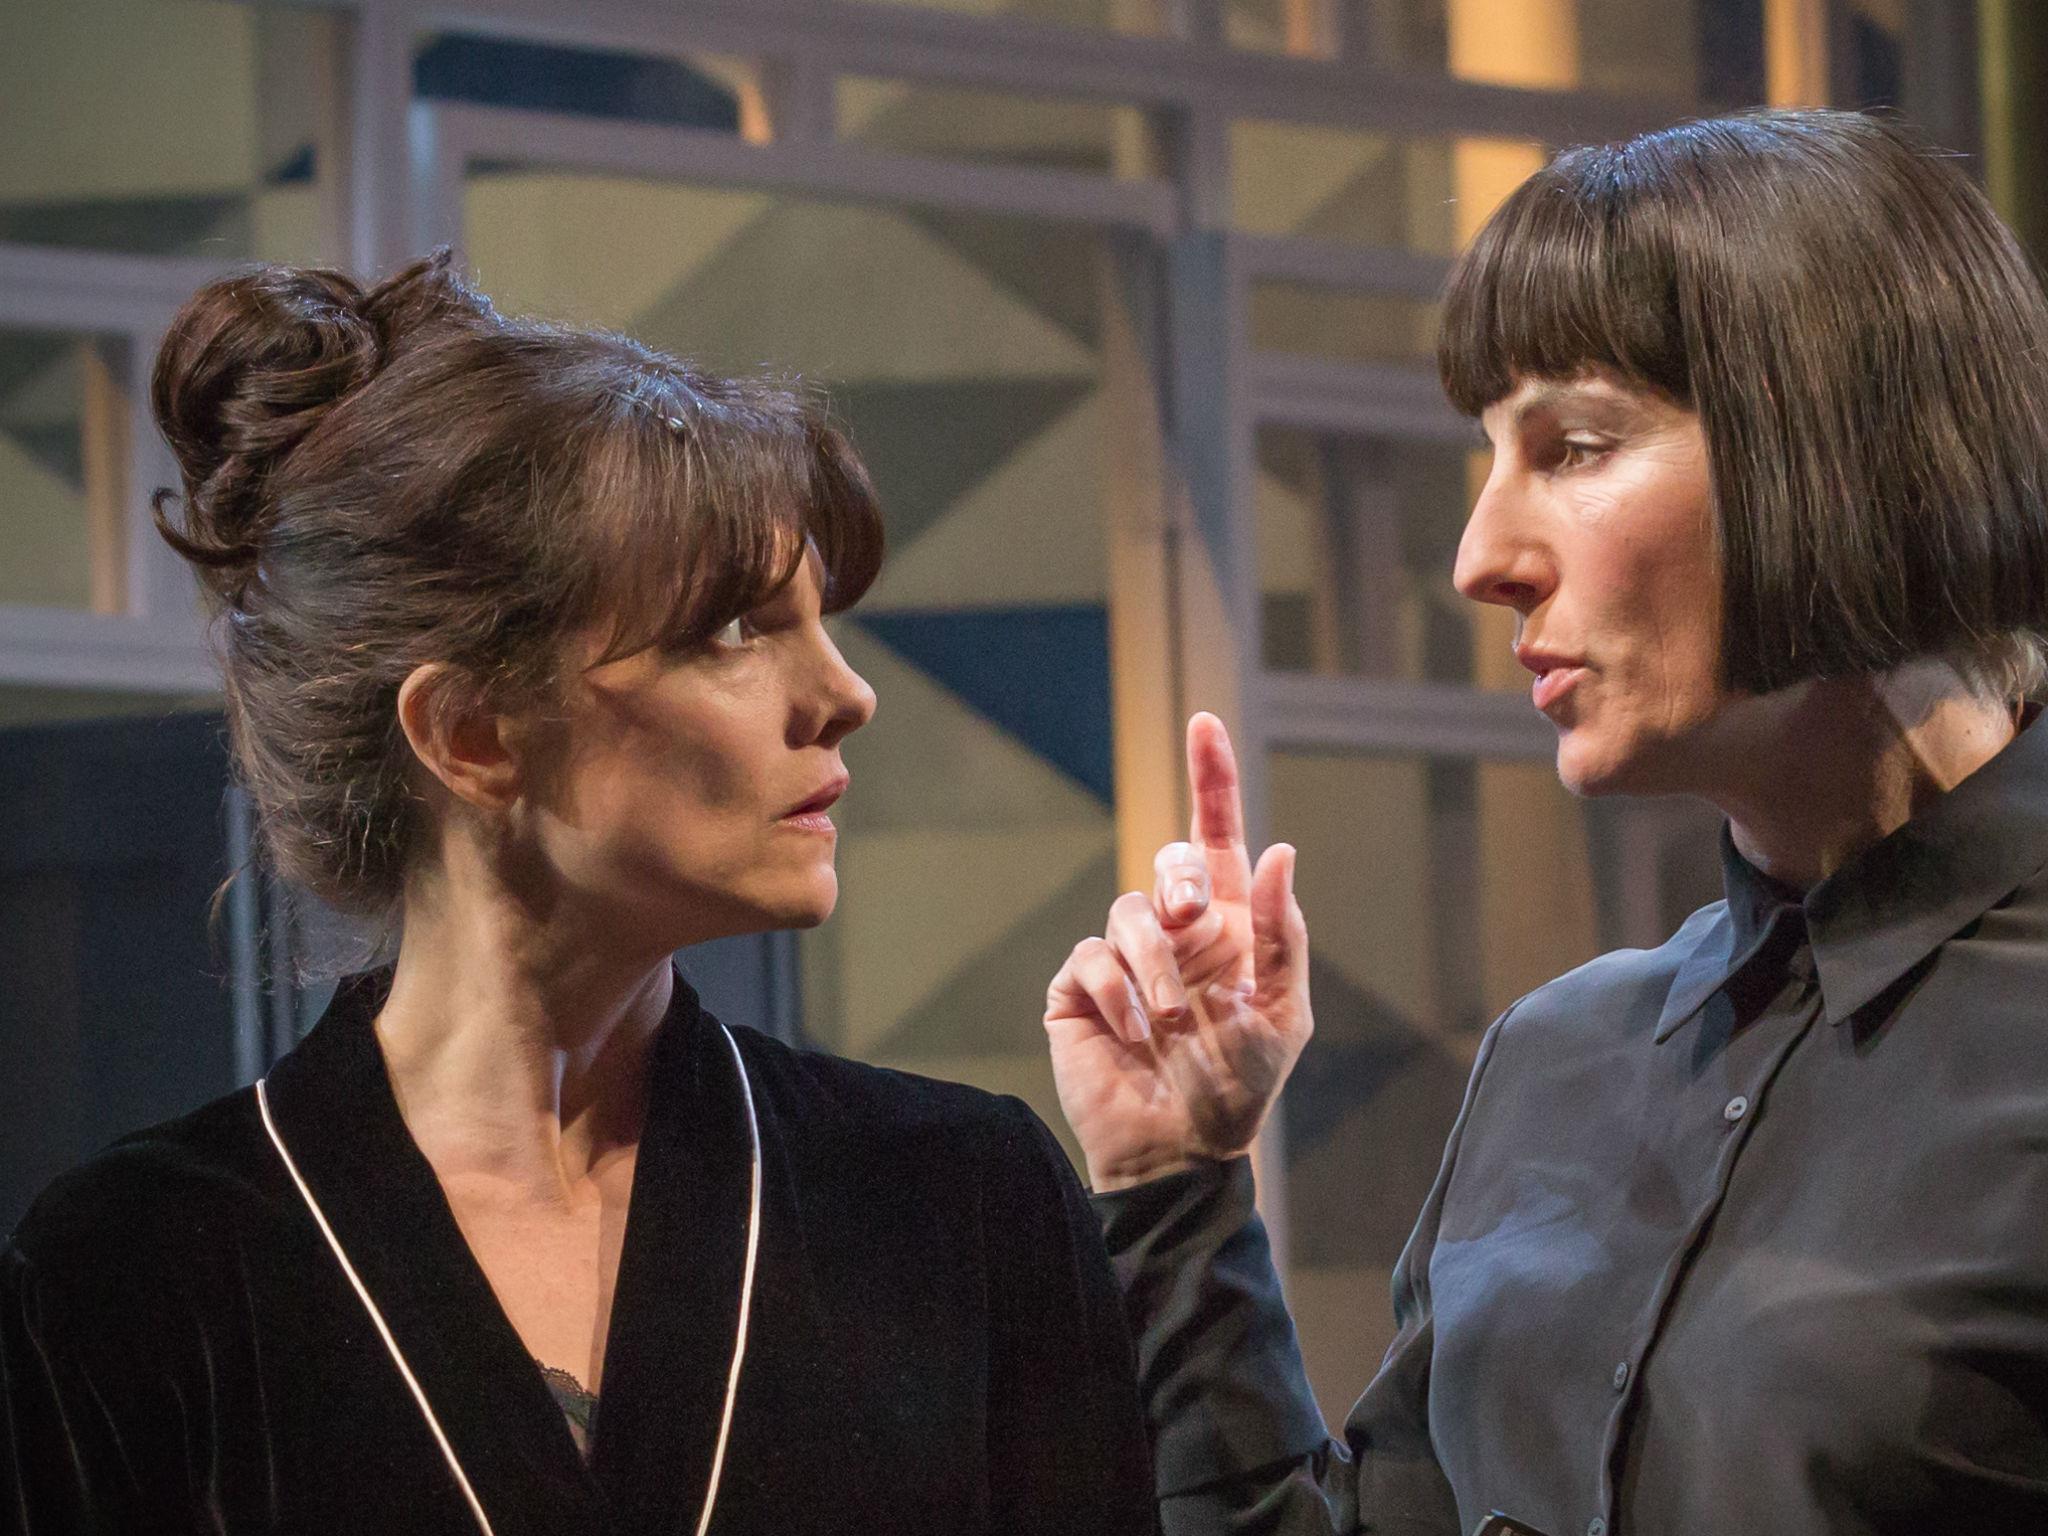 Tamsin Greig (L), pictured with Niky Wardley, who plays Maria, joins the ranks of actresses representing a more gender-fluid approach to tackling major Shakespearean roles 